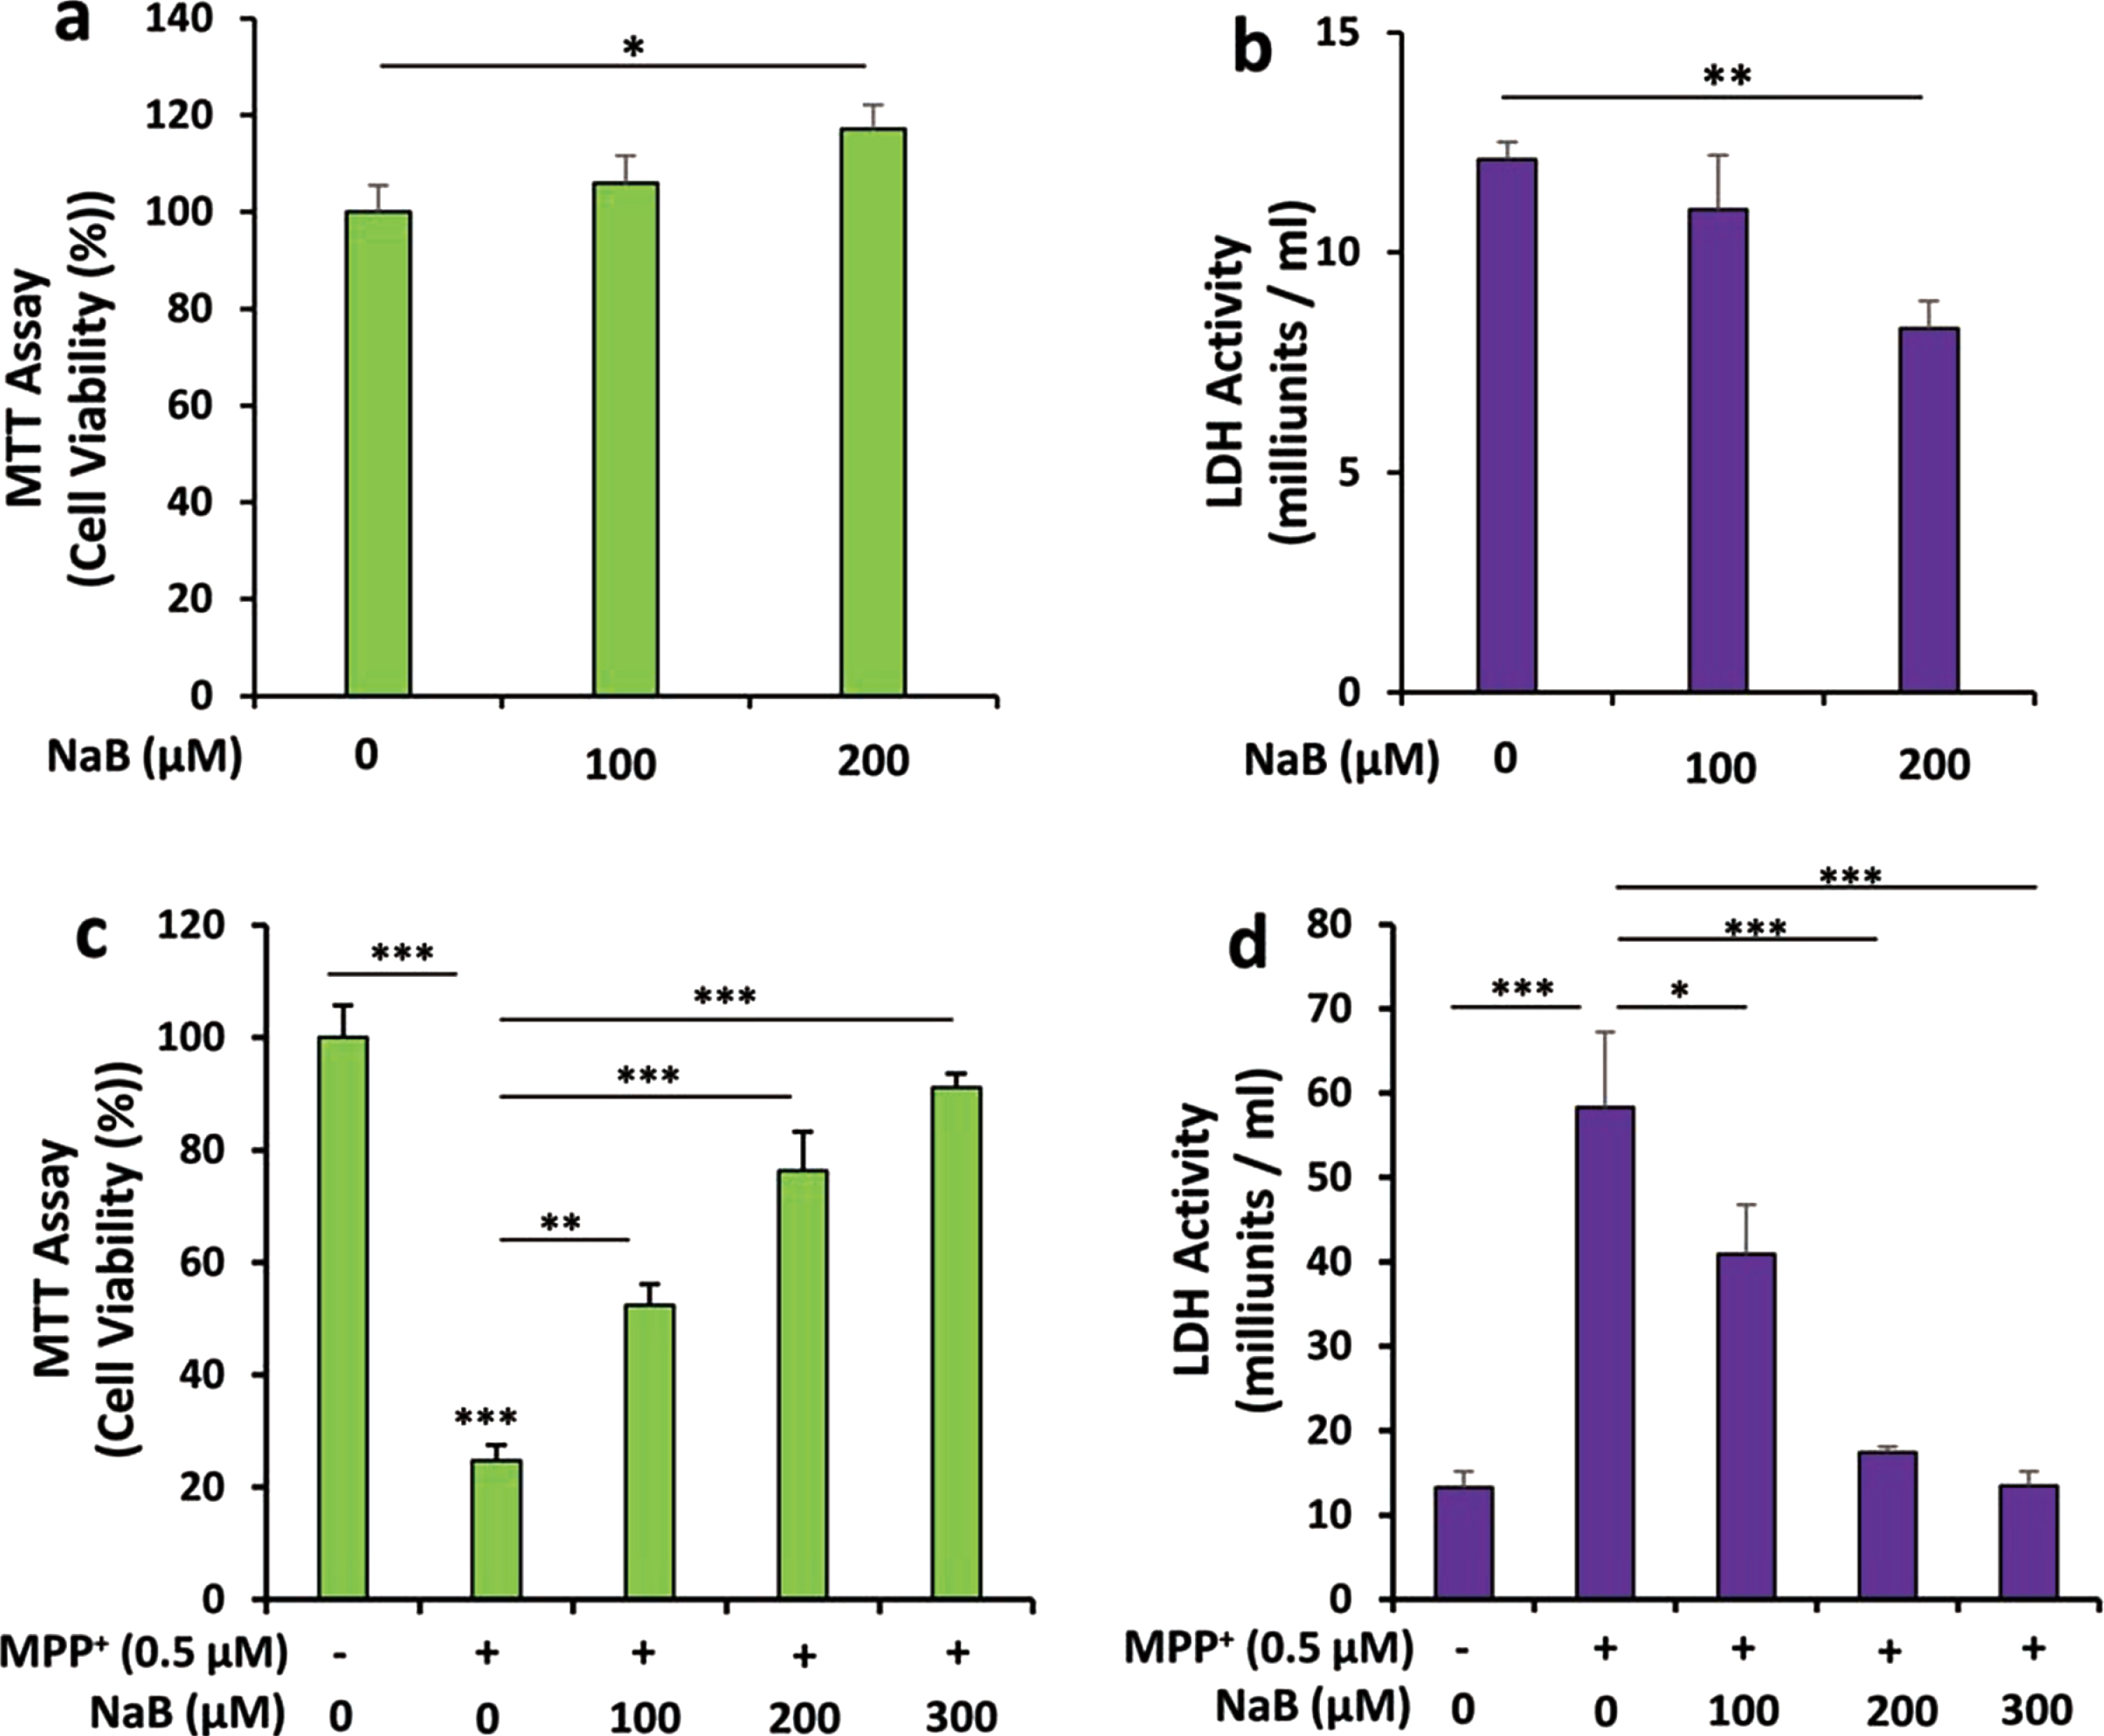 NaB stimulates cell viability and protects MN9D neuronal cells from MPP+-induced insult. Mouse MN9D neuronal cells were treated with different concentrations of NaB for 18 h under serum-free condition followed by measuring cell viability by MTT (A) and LDH (B). Cells pretreated with different concentrations of NaB for 2 h were insulted with 0.5μM MPP+ under serum-free condition. After 18 h, cell viability was measured by MTT (C) and LDH (D). Results are mean±SD of three independent experiments. *p < 0.05, **p < 0.01, and ***p < 0.001.